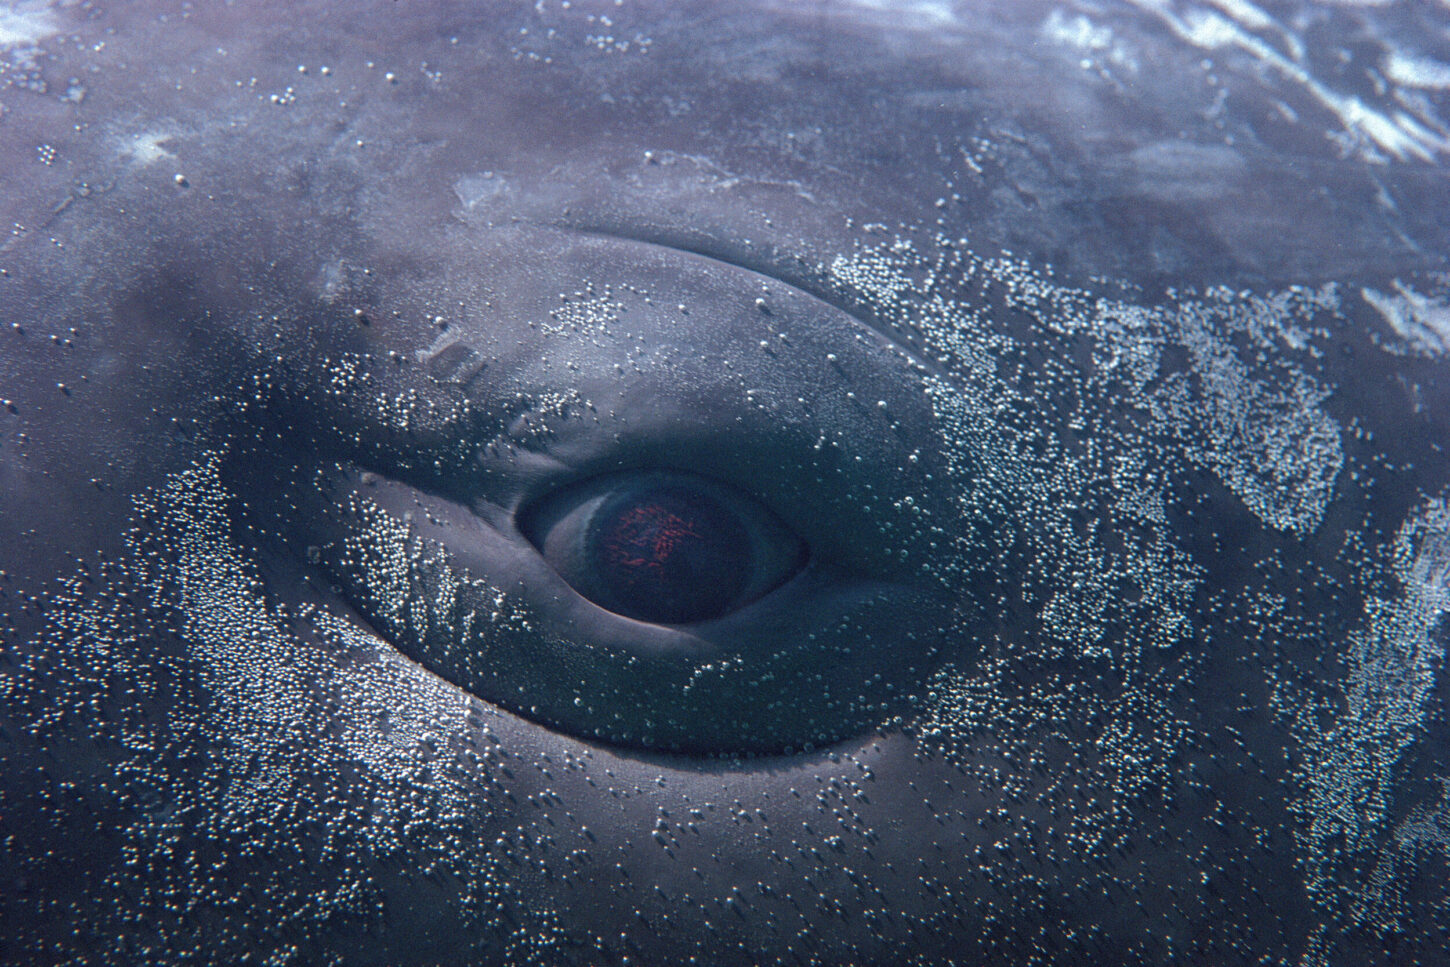 extreme-close-up-eye-of-baby-sperm-whale-physeter-macrocephalus-captive-d1940